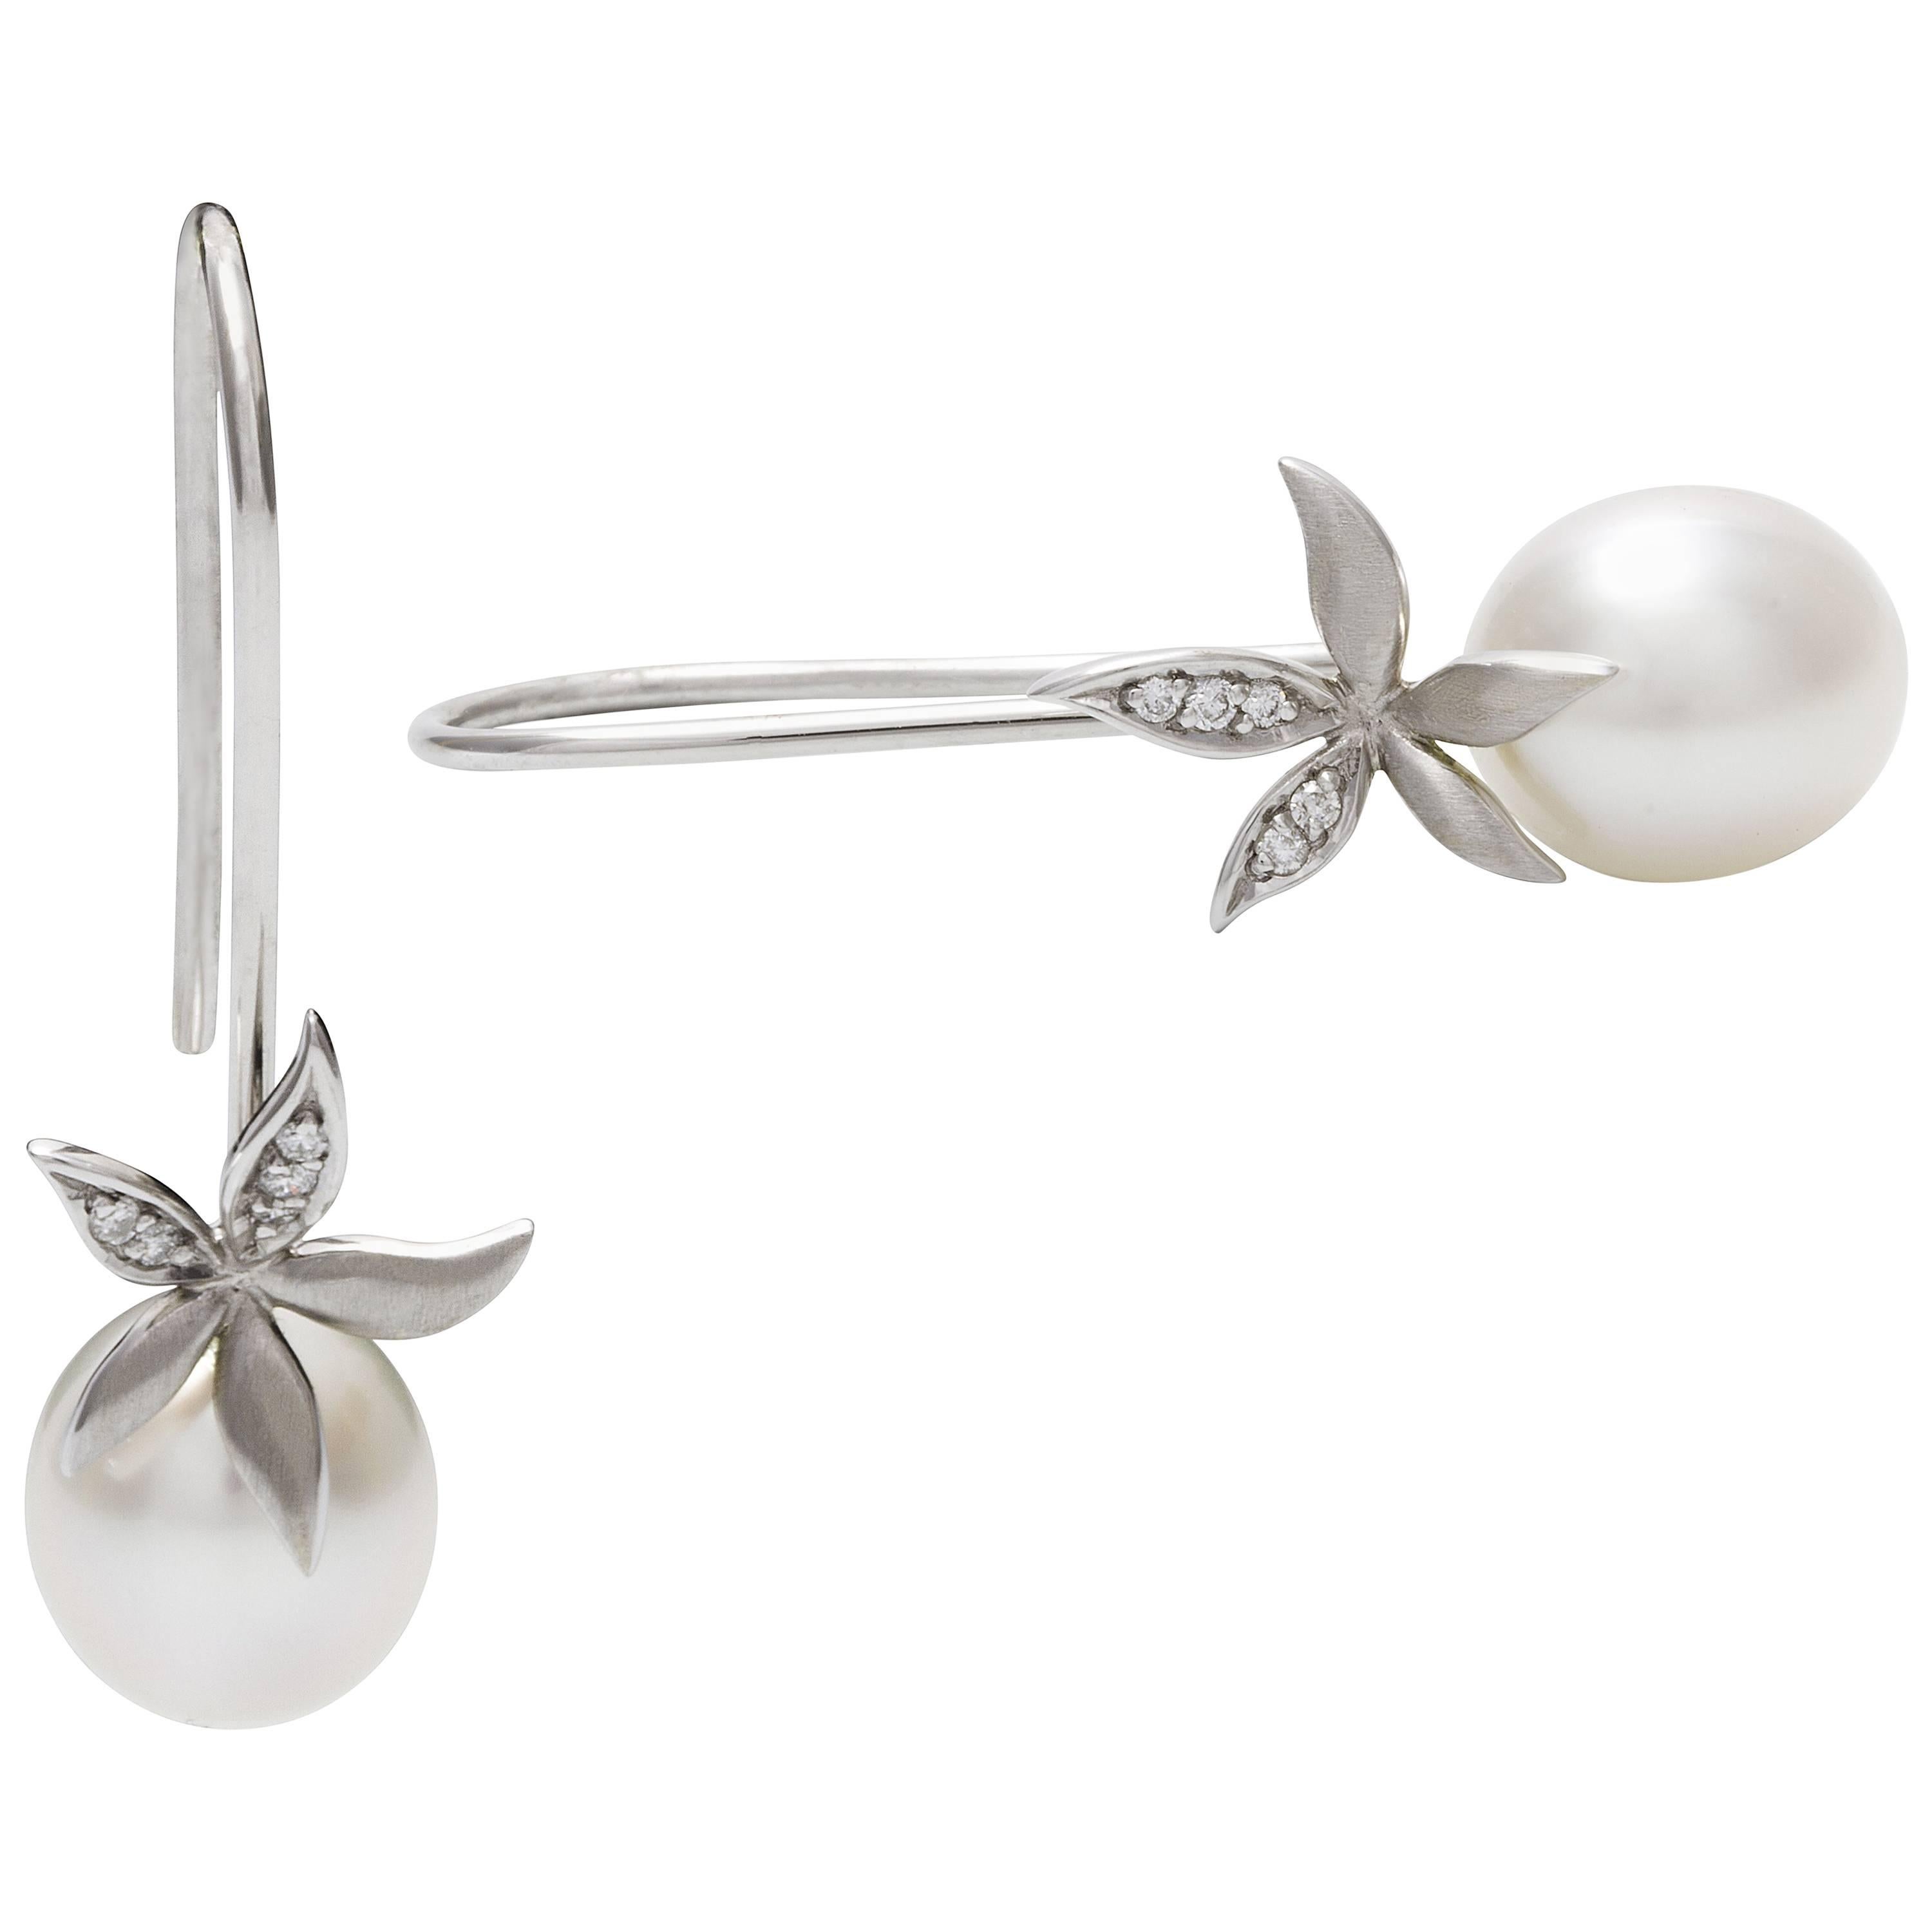 Flowers and pearls...

9 carat white gold shepherd hook flower earrings with 0.06 carat diamonds with beautiful 8-9 mm, drop shaped pearls, grade 1 meaning they have no marks on them, they are of a fine smooth surface with very high luster and white